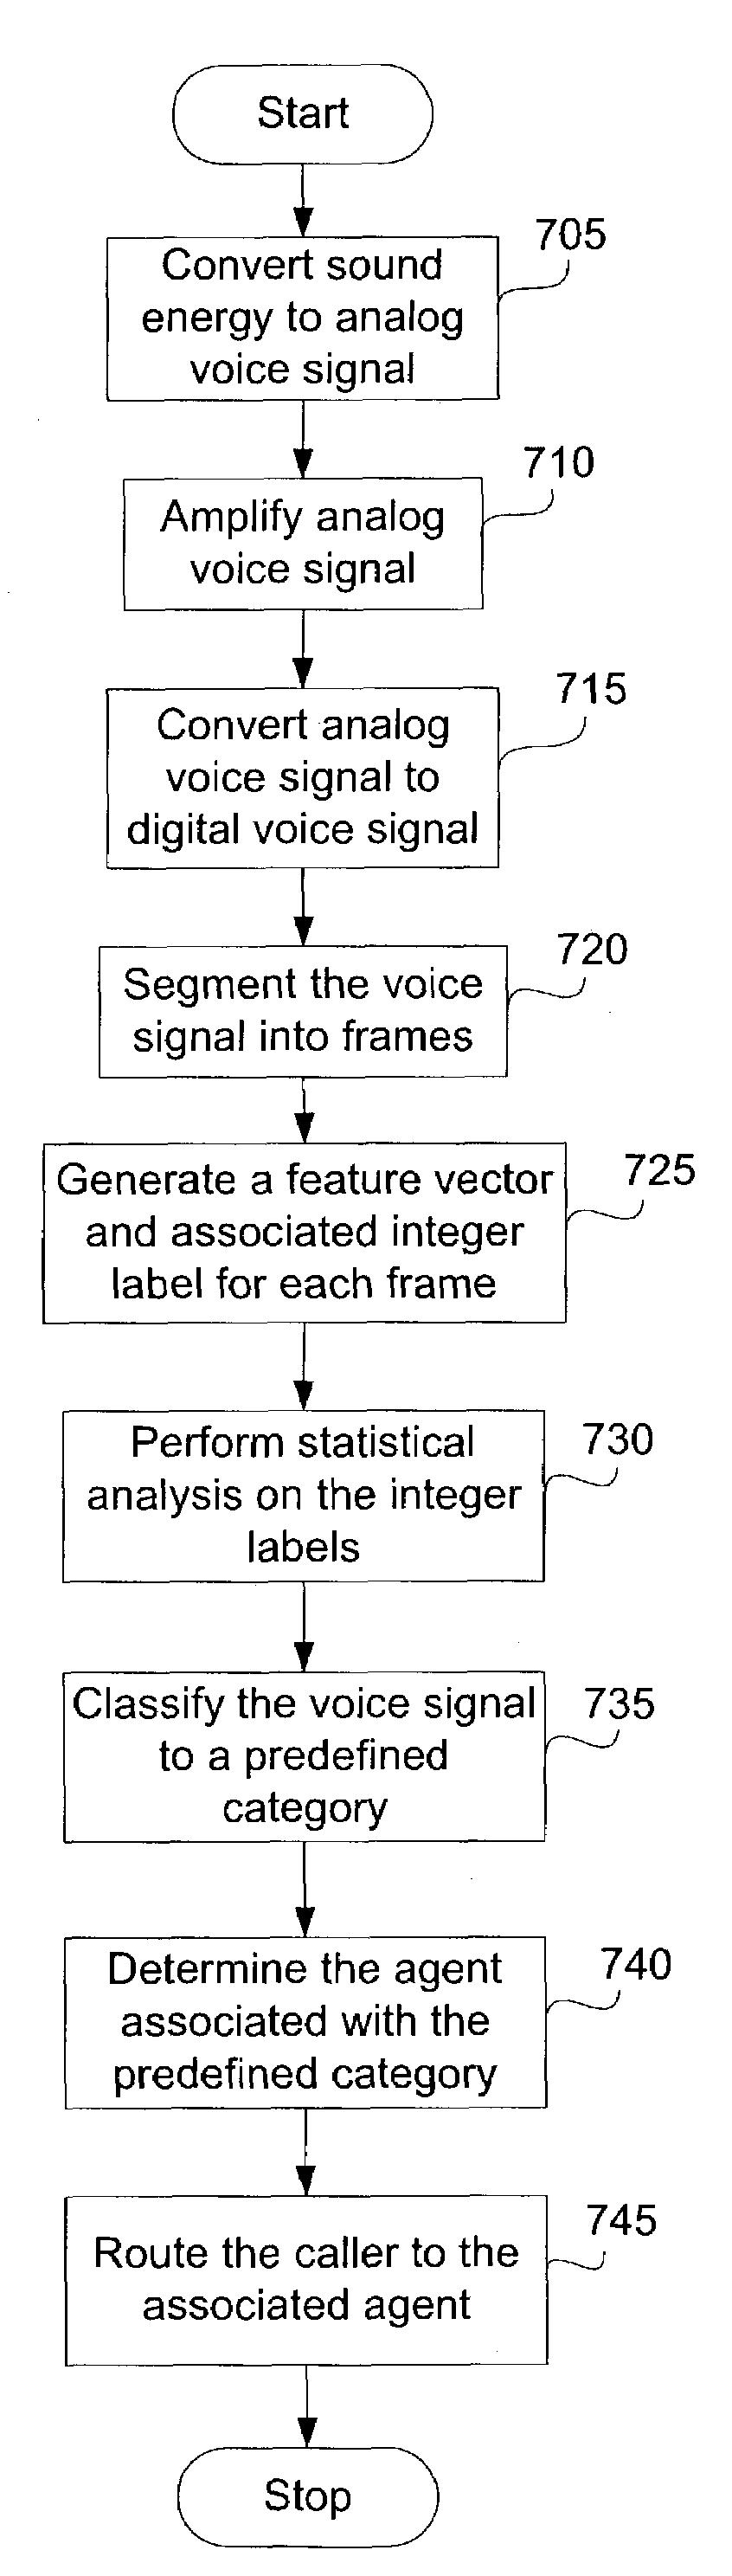 System and method for classification of voice signals